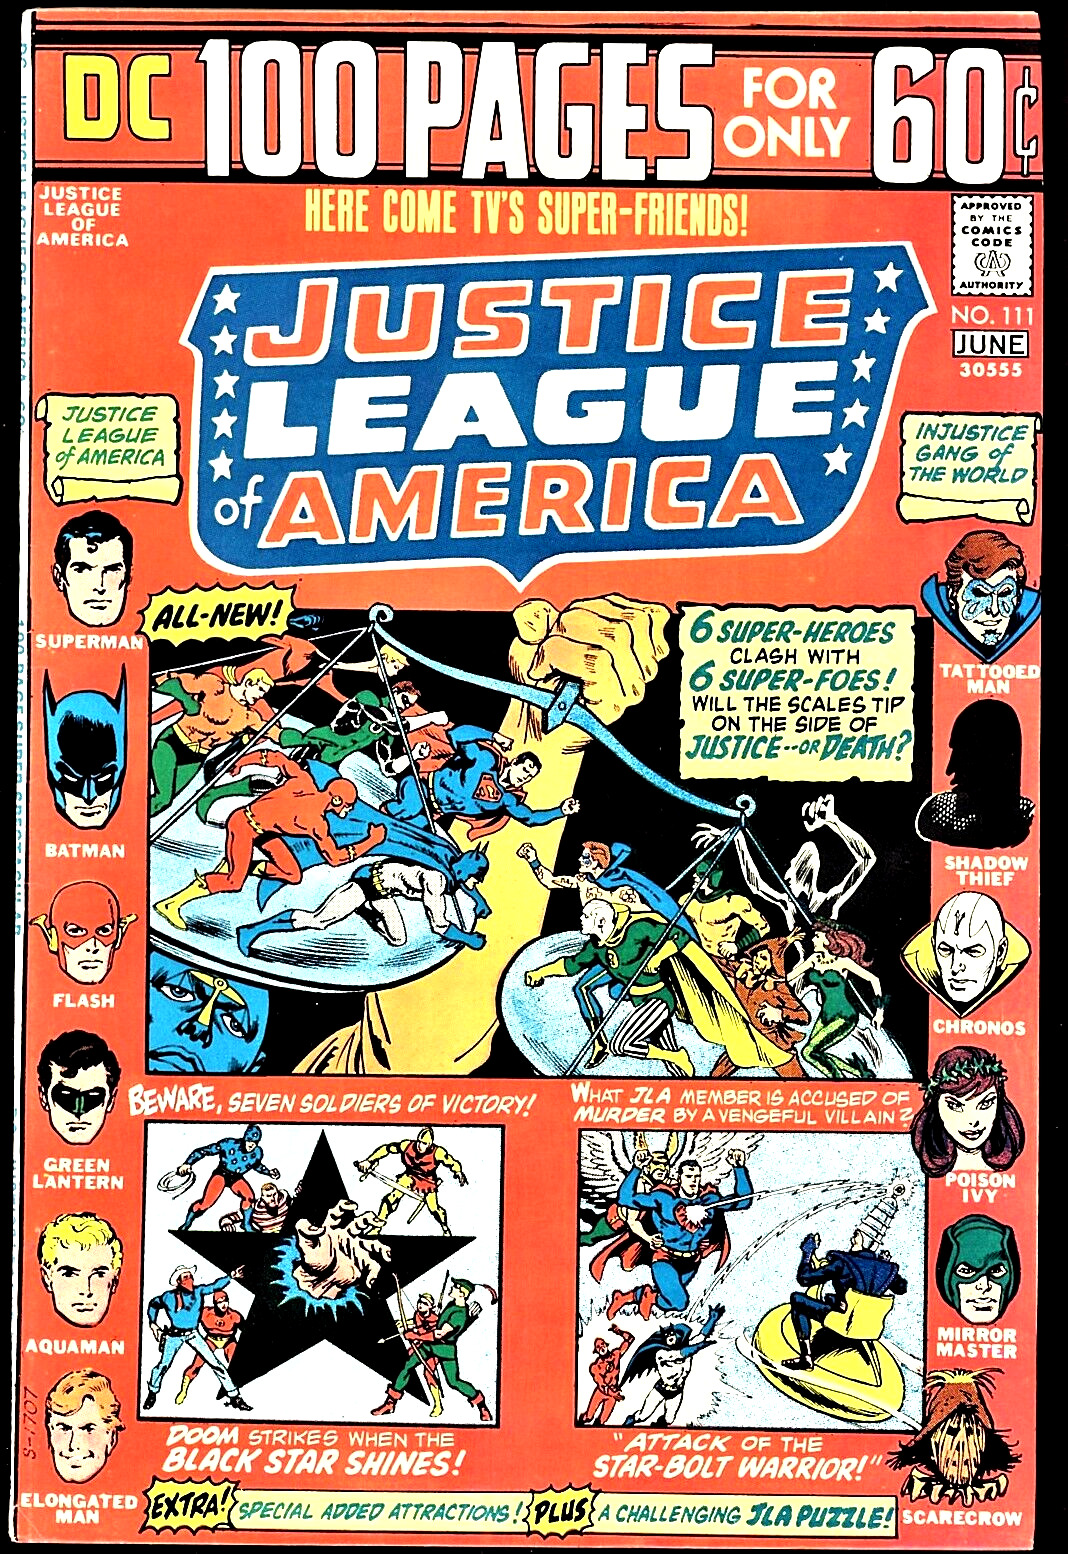 JUSTICE LEAGUE OF AMERICA #111 HIGH GRADE 100 PAGE ISSUE, 1ST APP LIBRA 1974